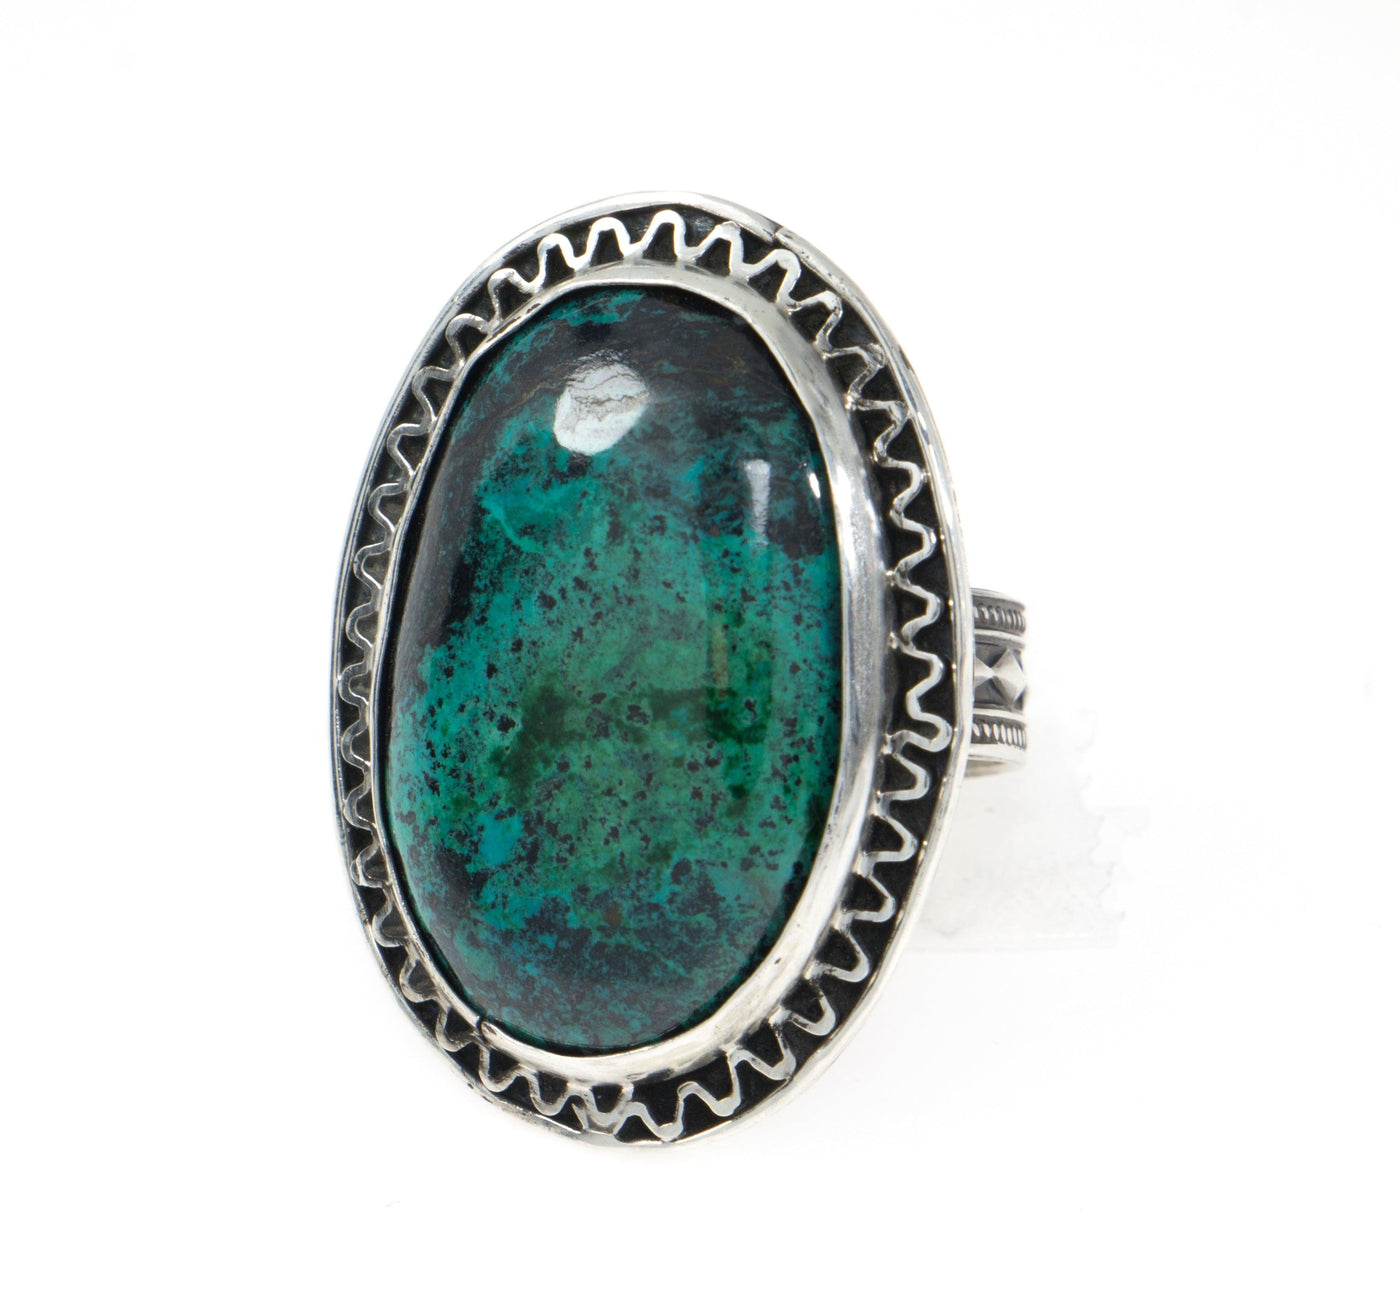 Eilat Stone Ring in 925 Sterling Silver #5 - Spring Nahal